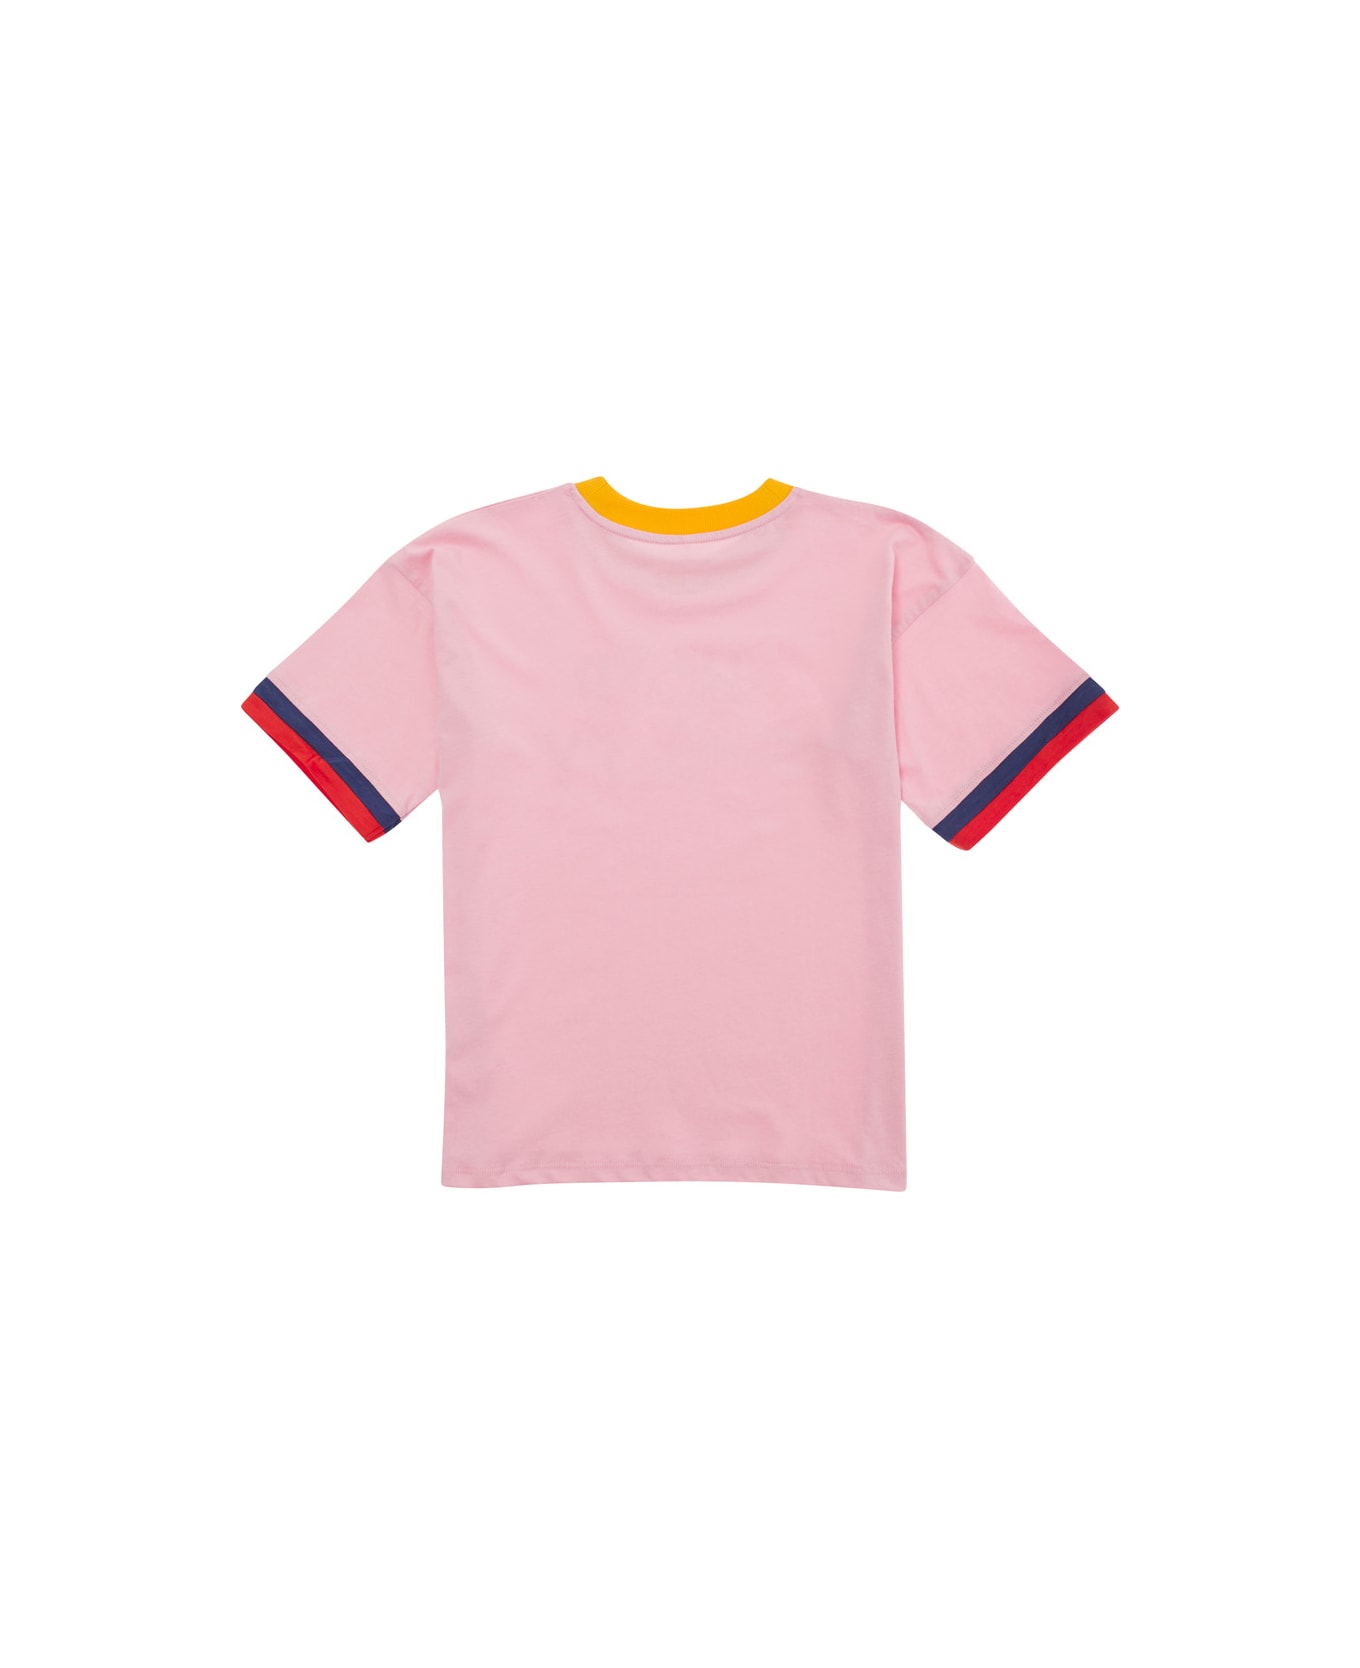 Mini Rodini Pink T-shirt With Super Sporty Print In Cotton Boy - Pink